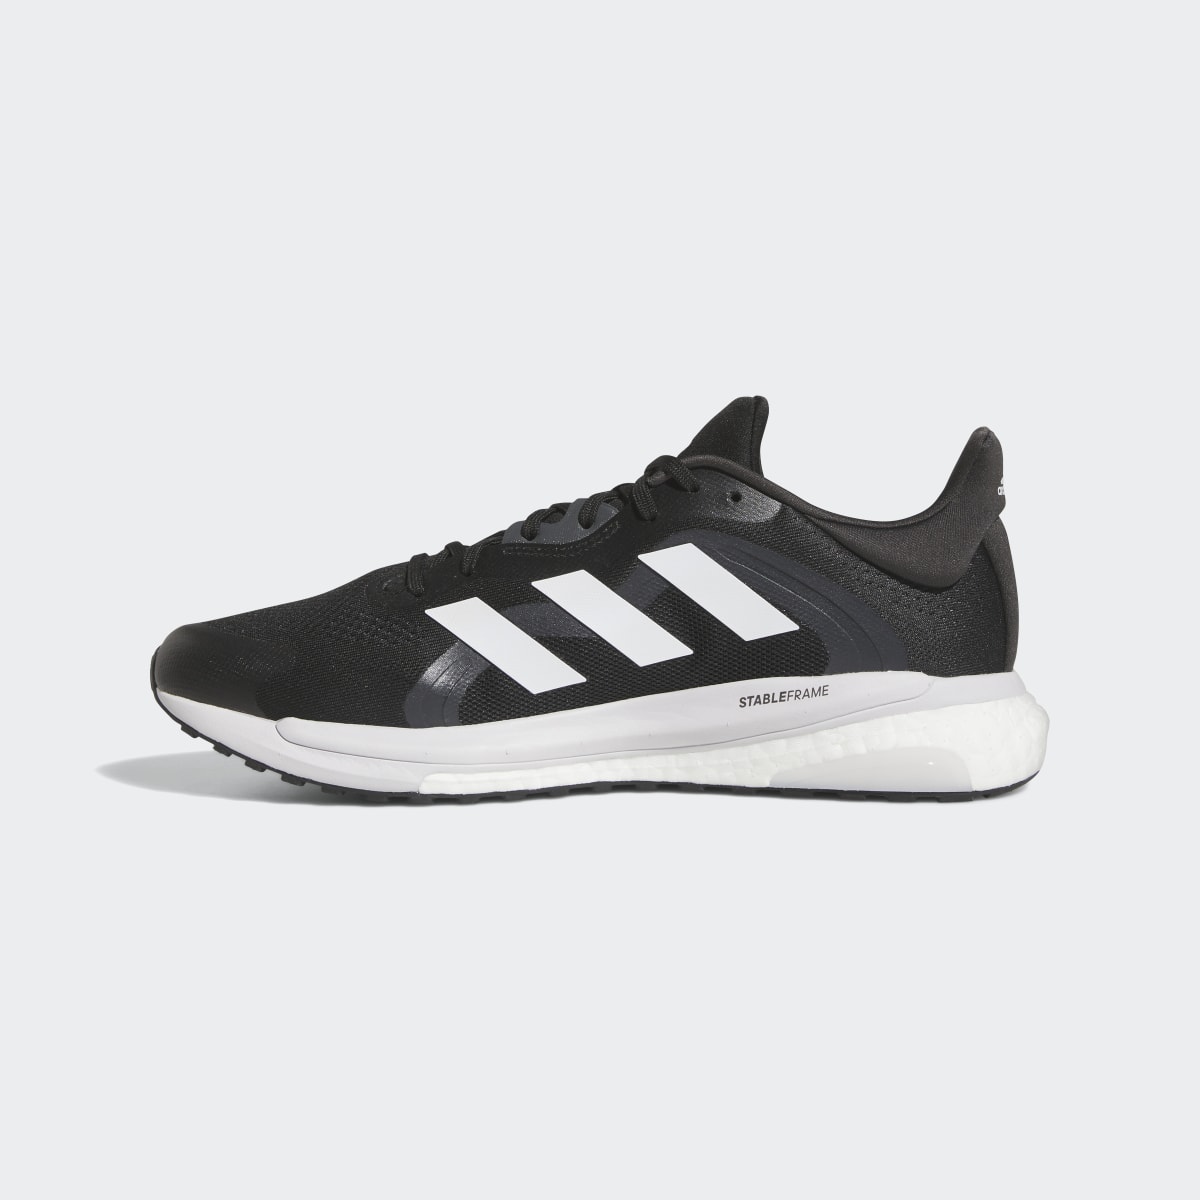 Adidas SolarGlide 4 ST Shoes. 11